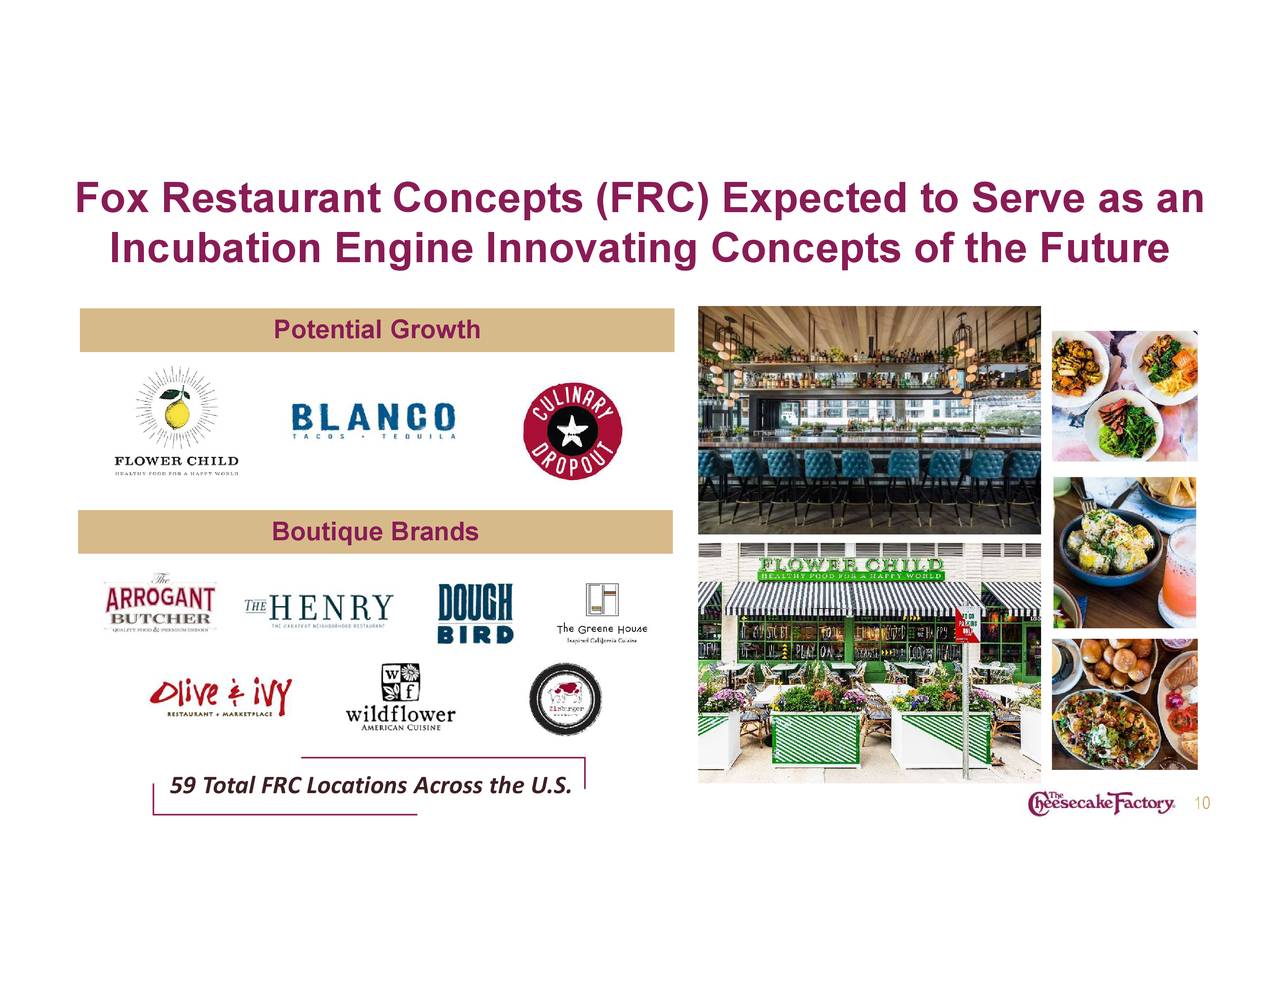 Fox Restaurant Concepts (FRC) Expected to Serve as an